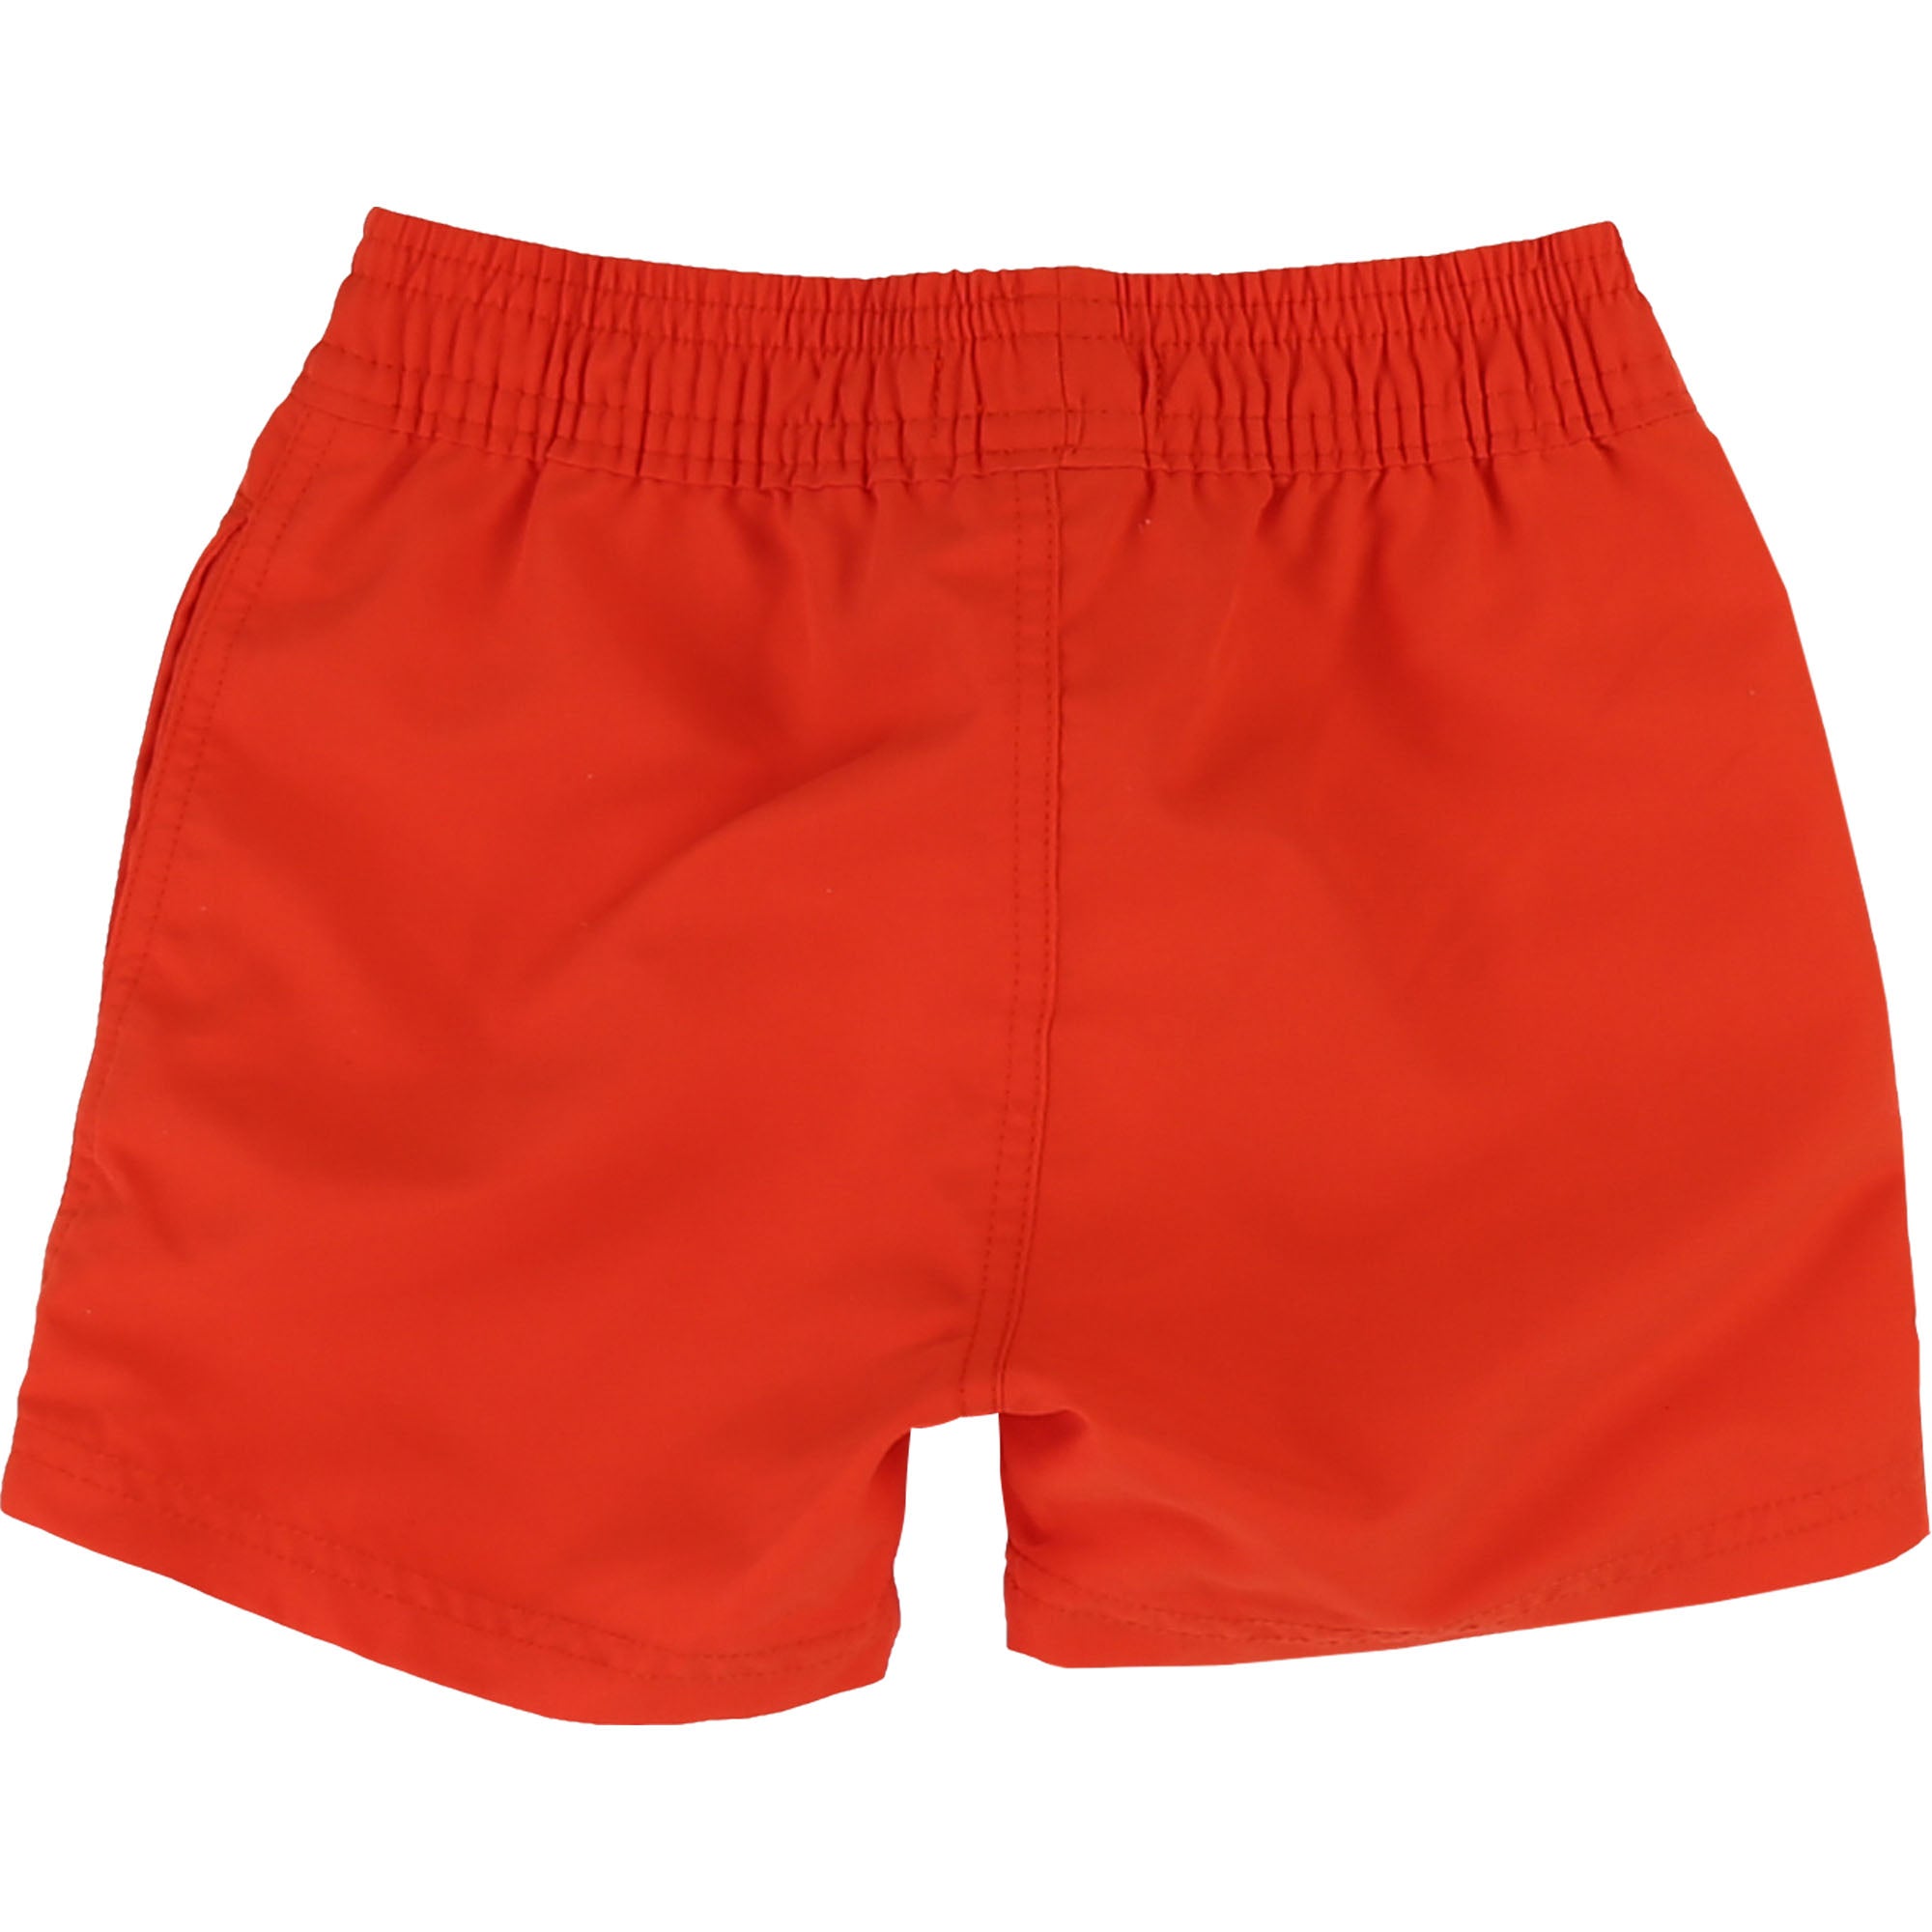 Boys Red Surfer Cotton Shorts